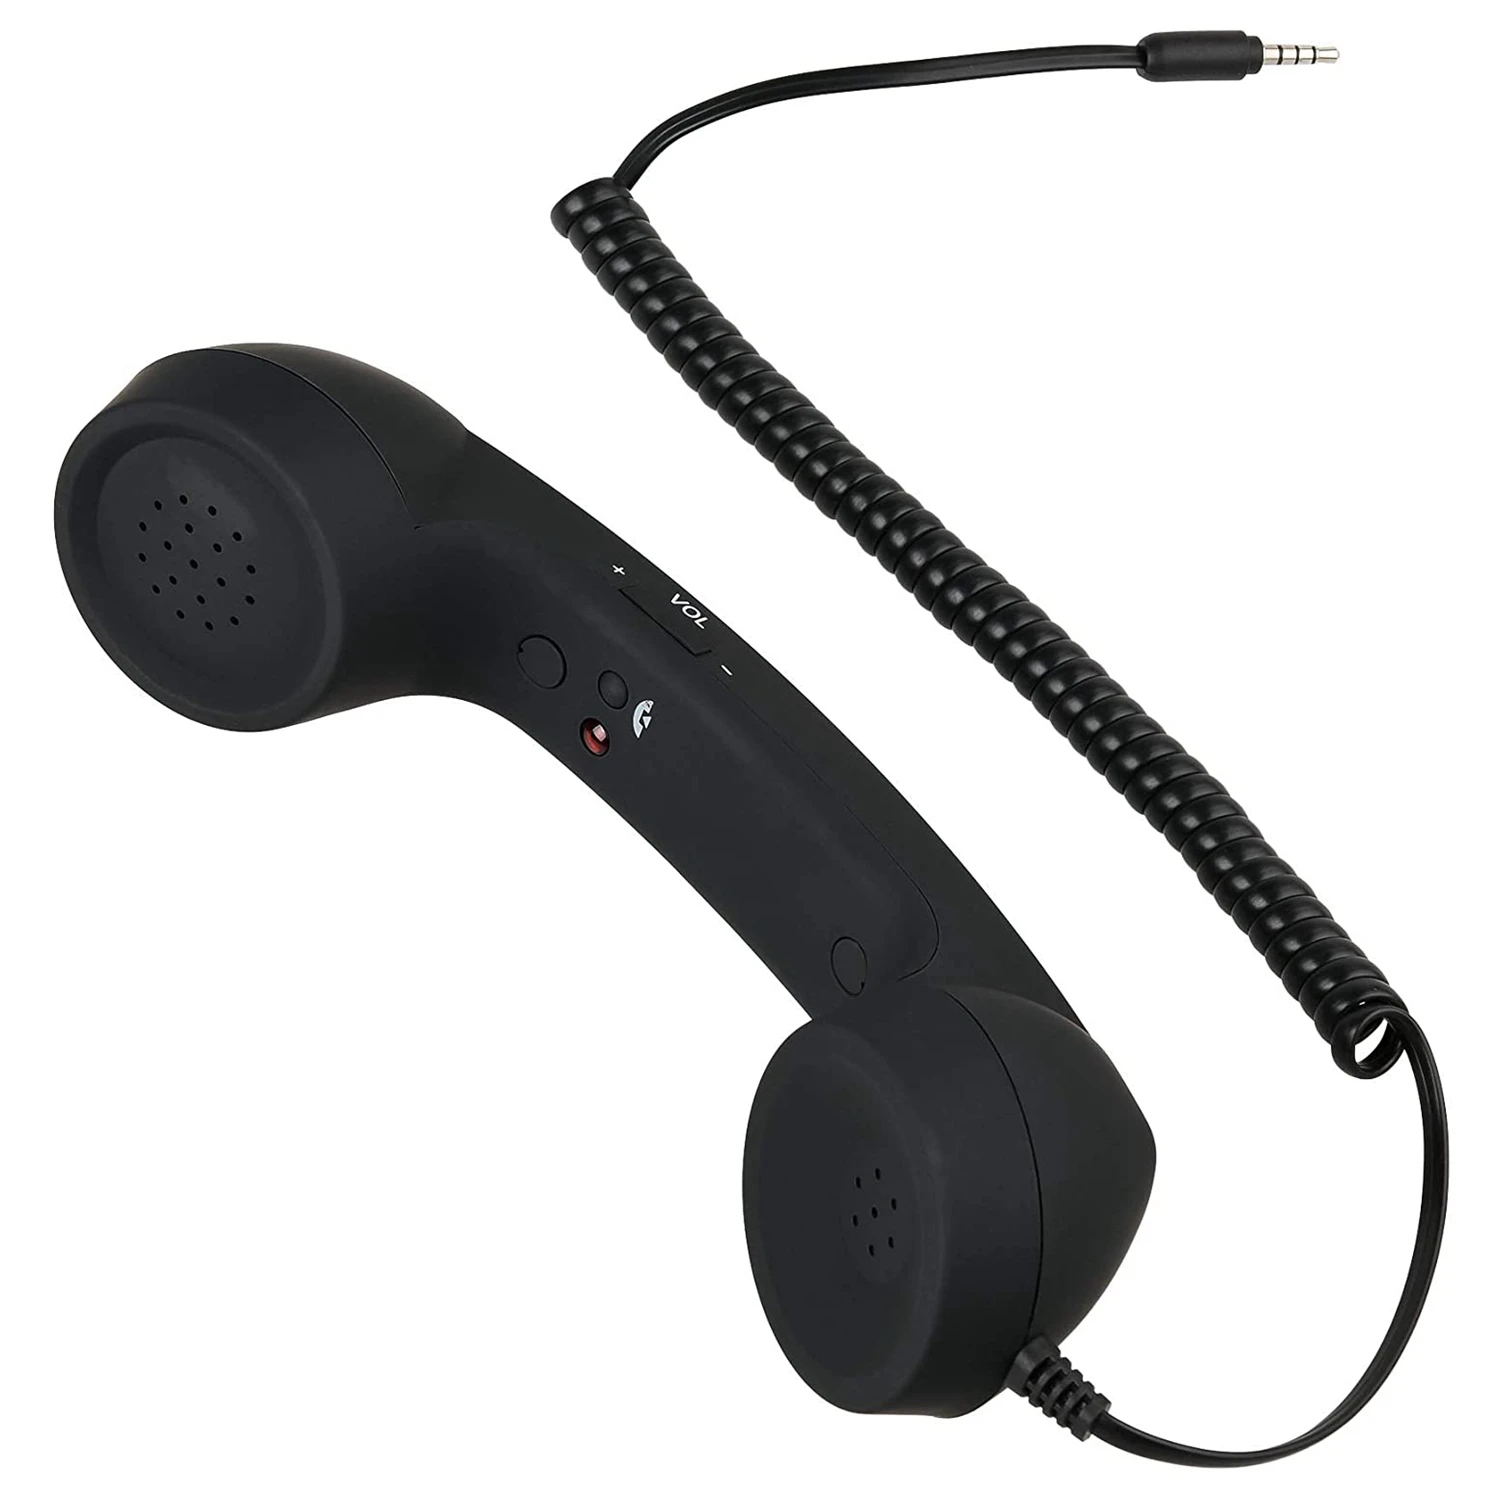 

Vintage Retro Telephone Handset Cell Phone Receiver MIC Microphone for Cellphone Smartphone, 3.5 mm Socket (Black)